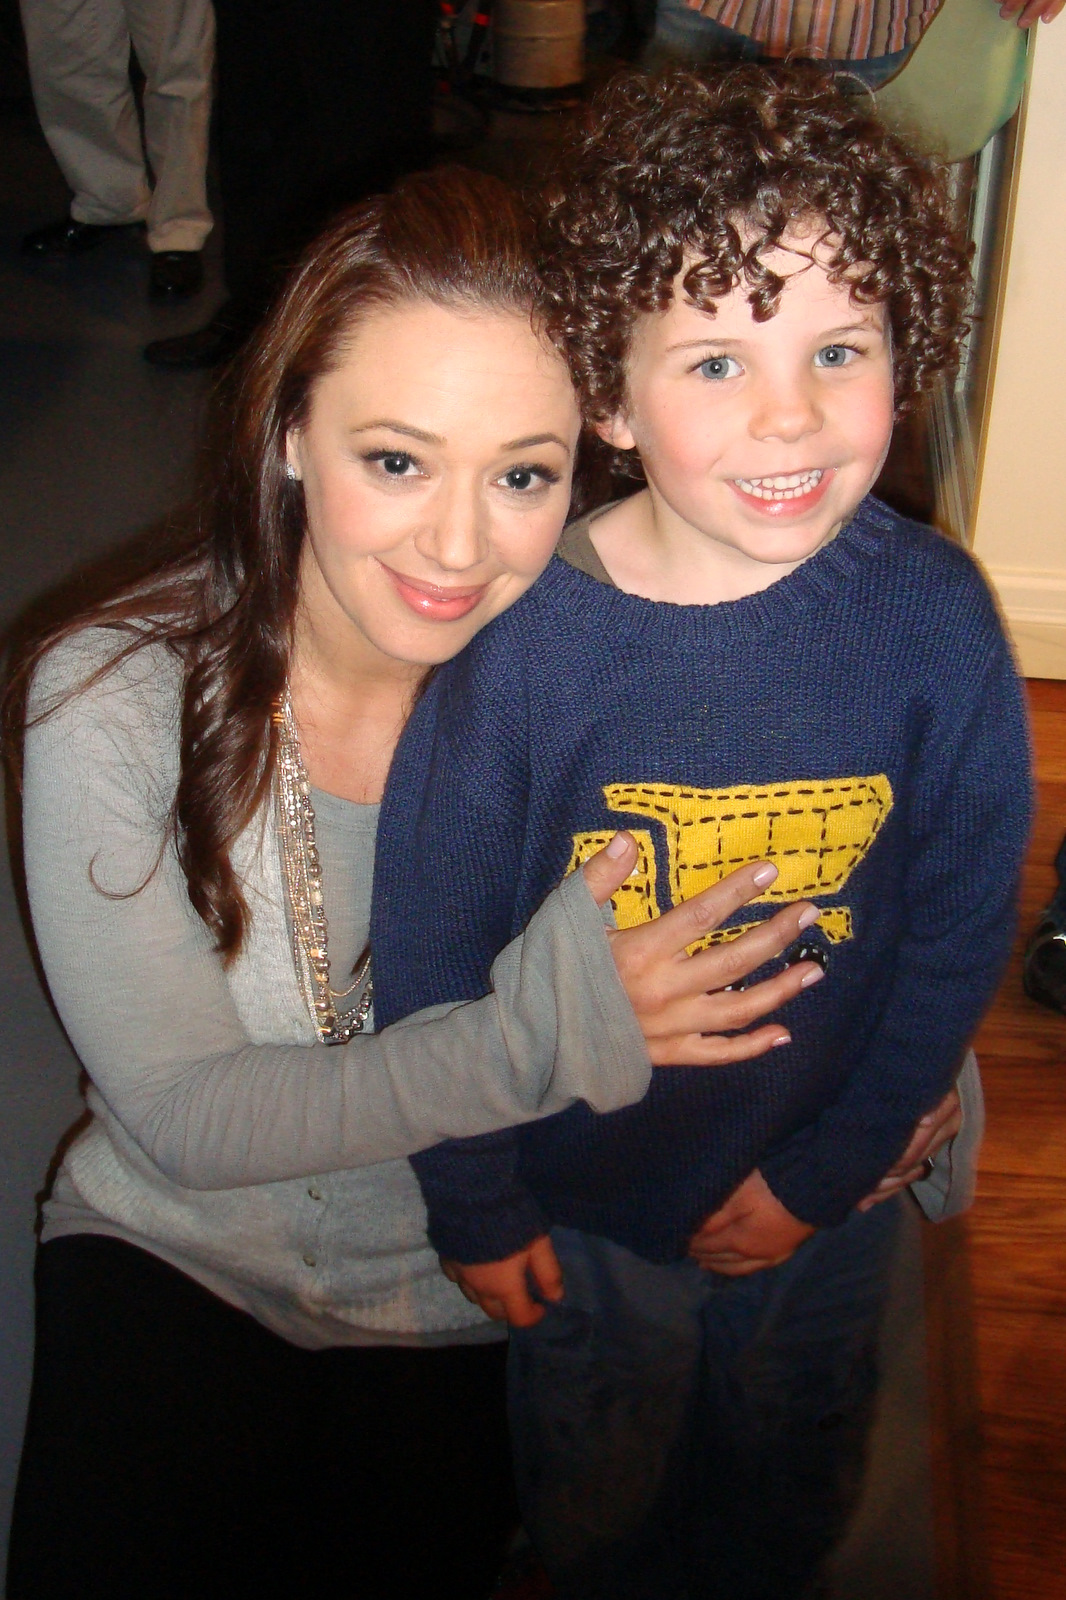 Jadon Sand and Leah Remini on the set of Married Not Dead. April 2009